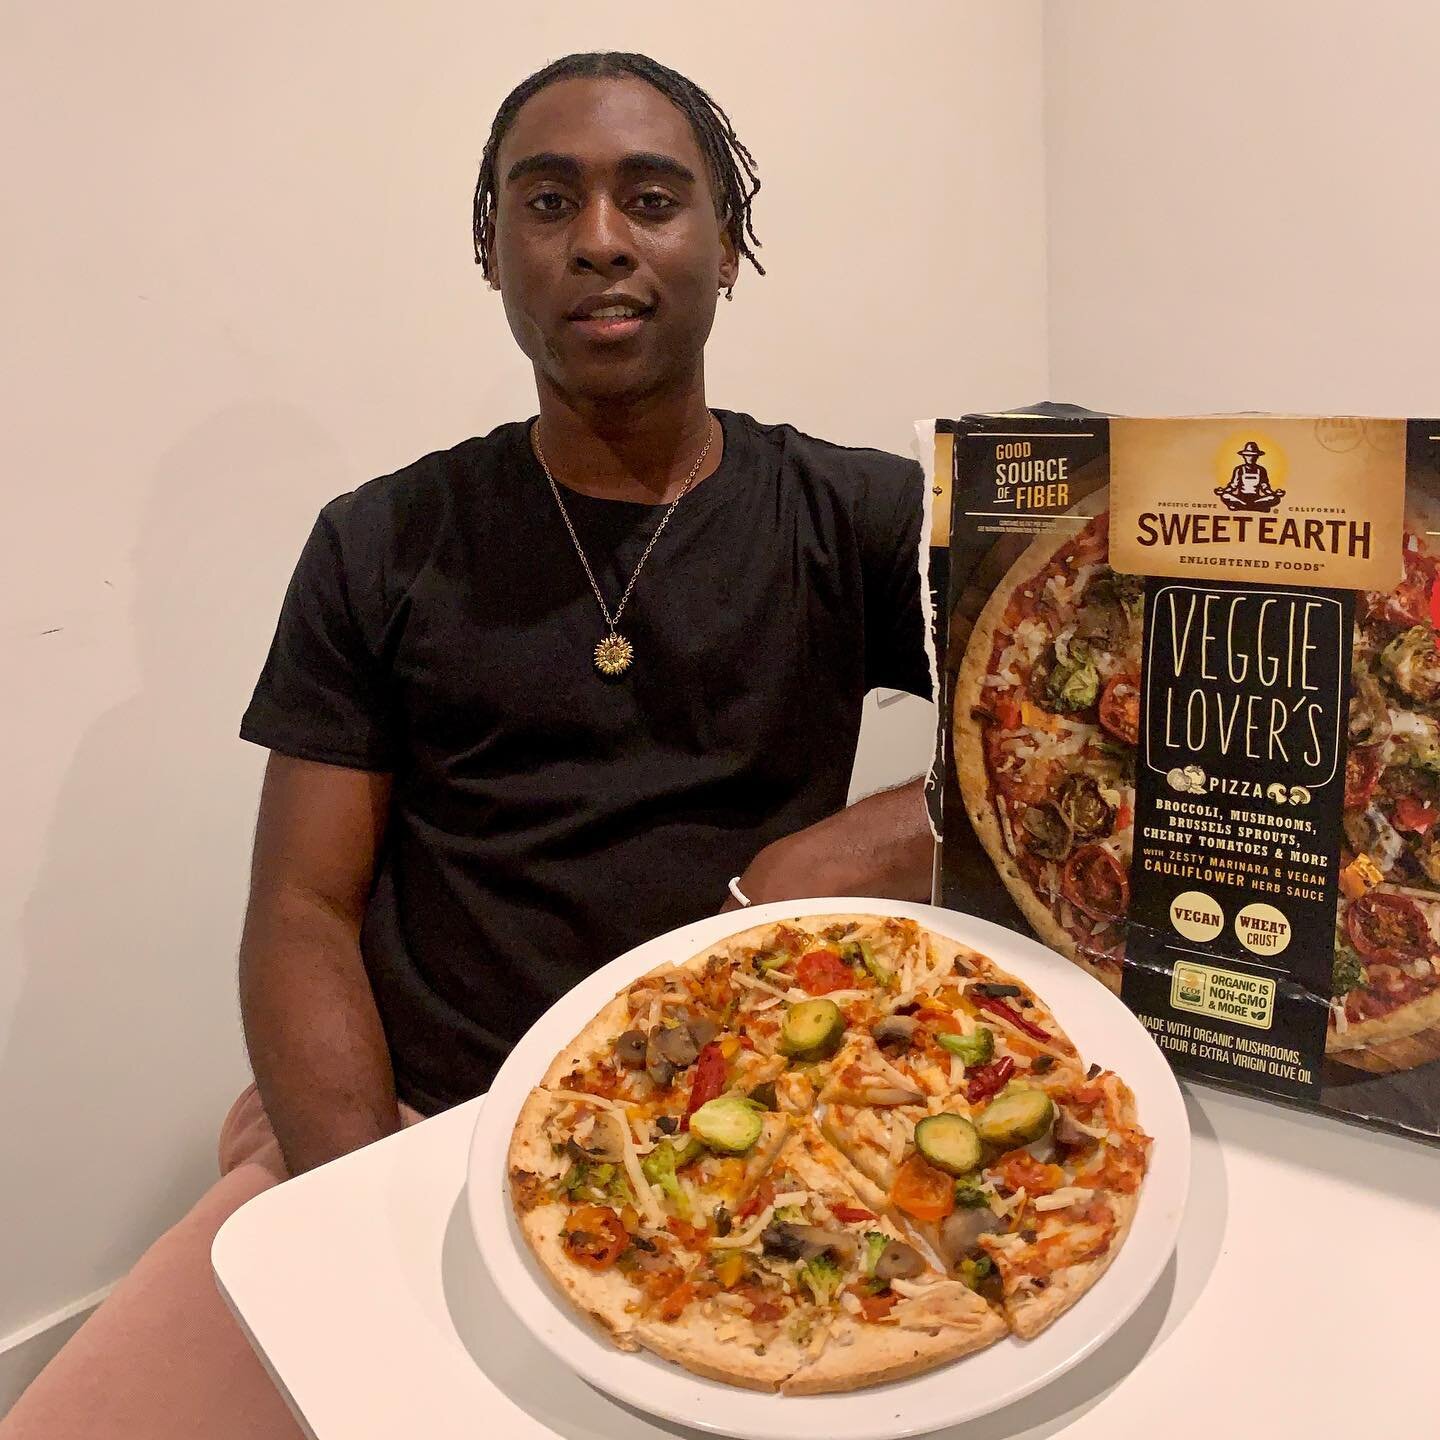 Making dinner tonight was pretty easy as I only had to pop a pizza in the oven. 🍕I tried a few of @sweetearthfoods pizzas already so tonight I tried the Veggie Lover&rsquo;s Pizza, topped with a variety of veggies and delicious wheat crust. 😋 #EatW